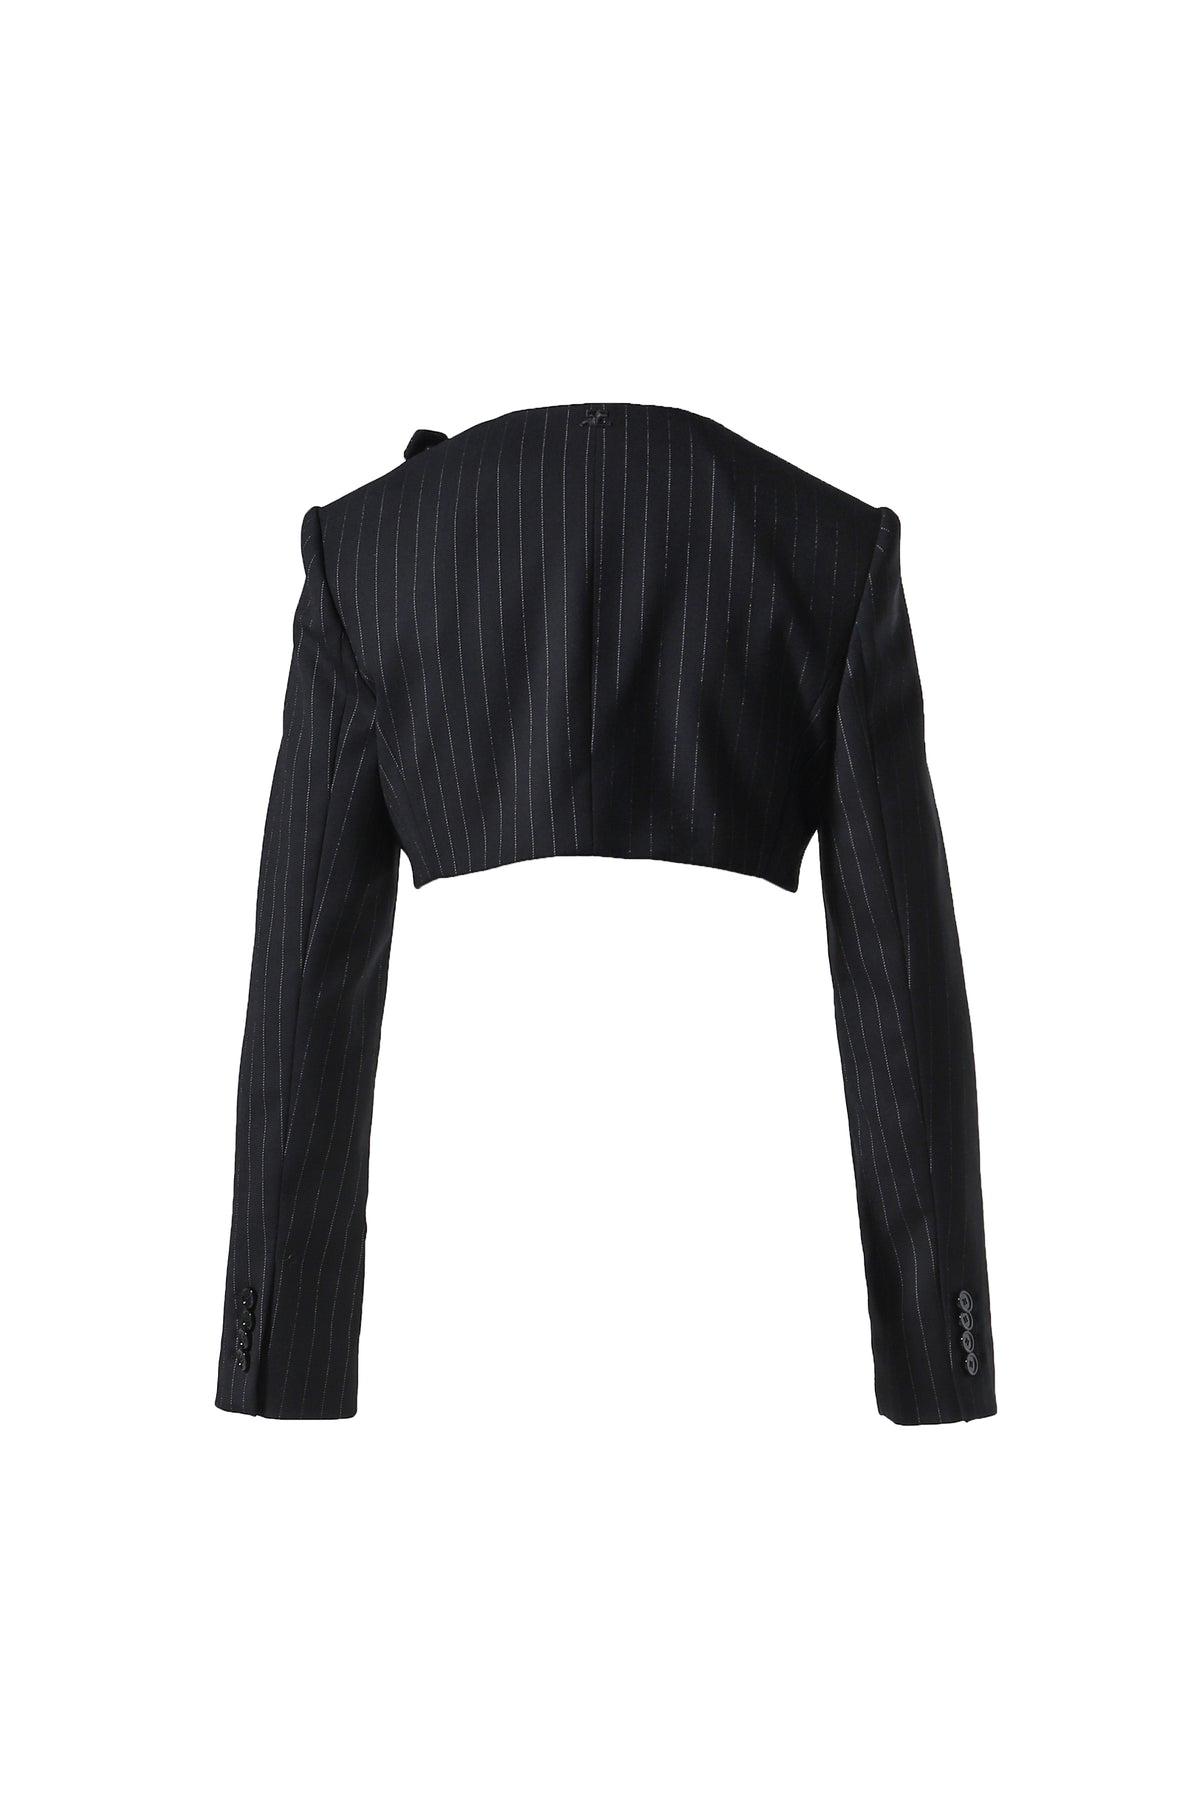 BUCKLE TAILORED PINSTRIPE TOP / BLK/WHT